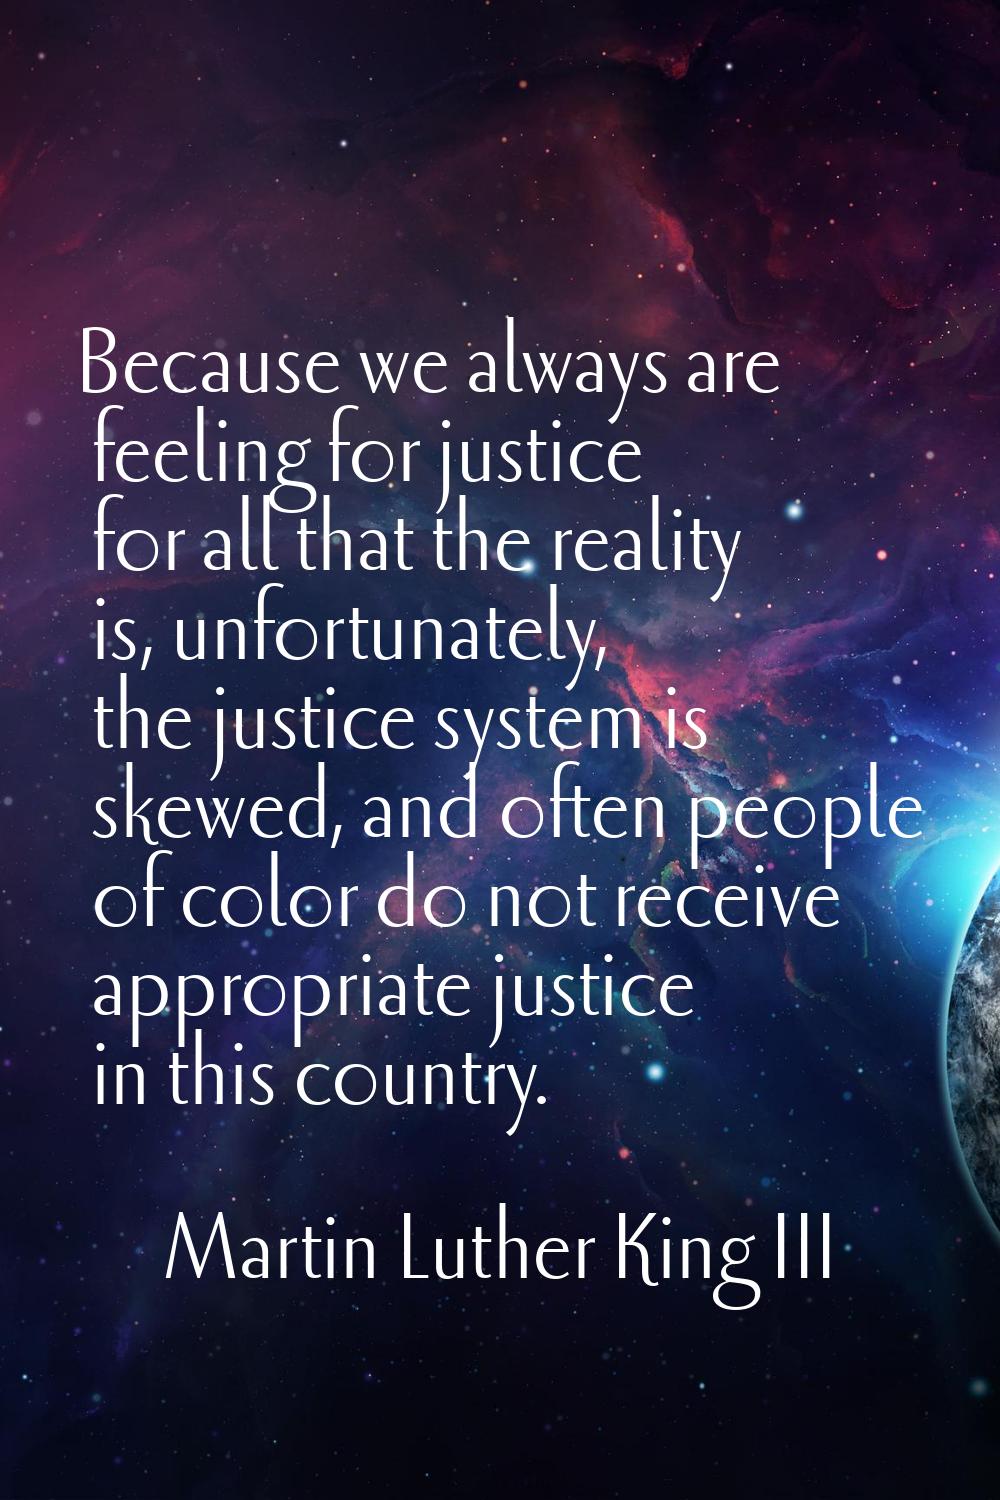 Because we always are feeling for justice for all that the reality is, unfortunately, the justice s